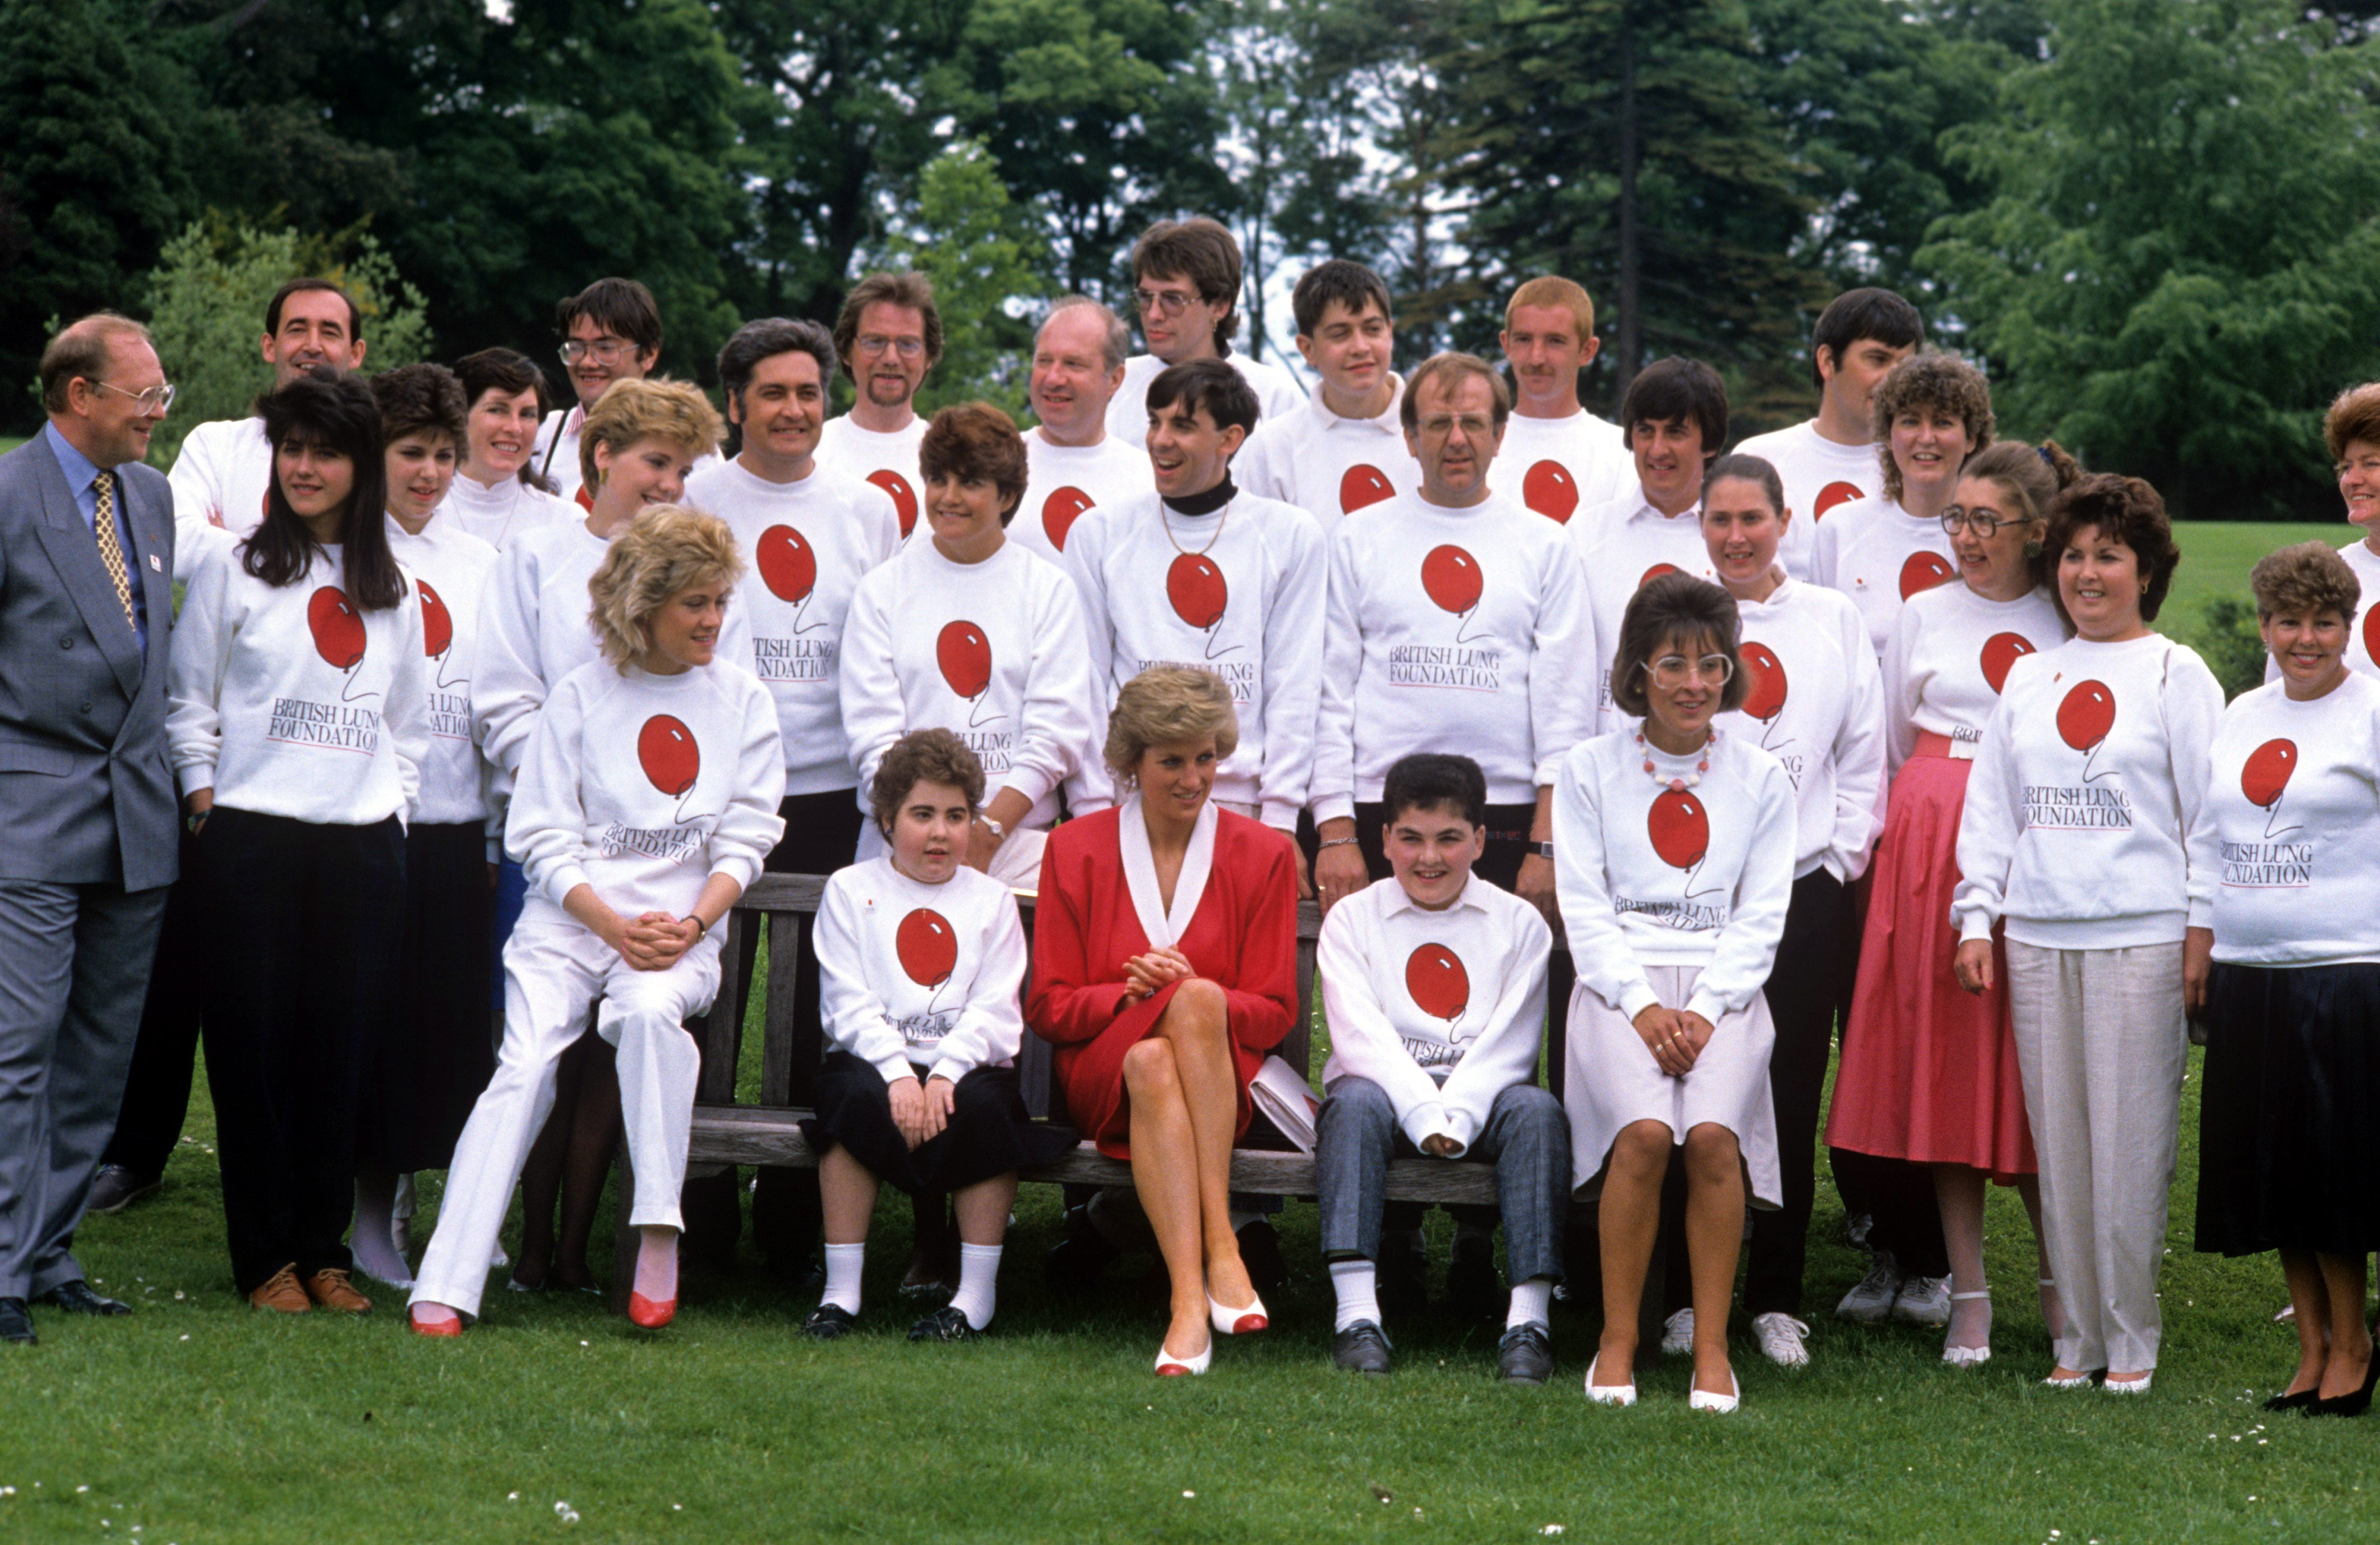 Princess Diana with patients wearing British Heart Foundation tops at Papworth Heart Hospital in June 1988.